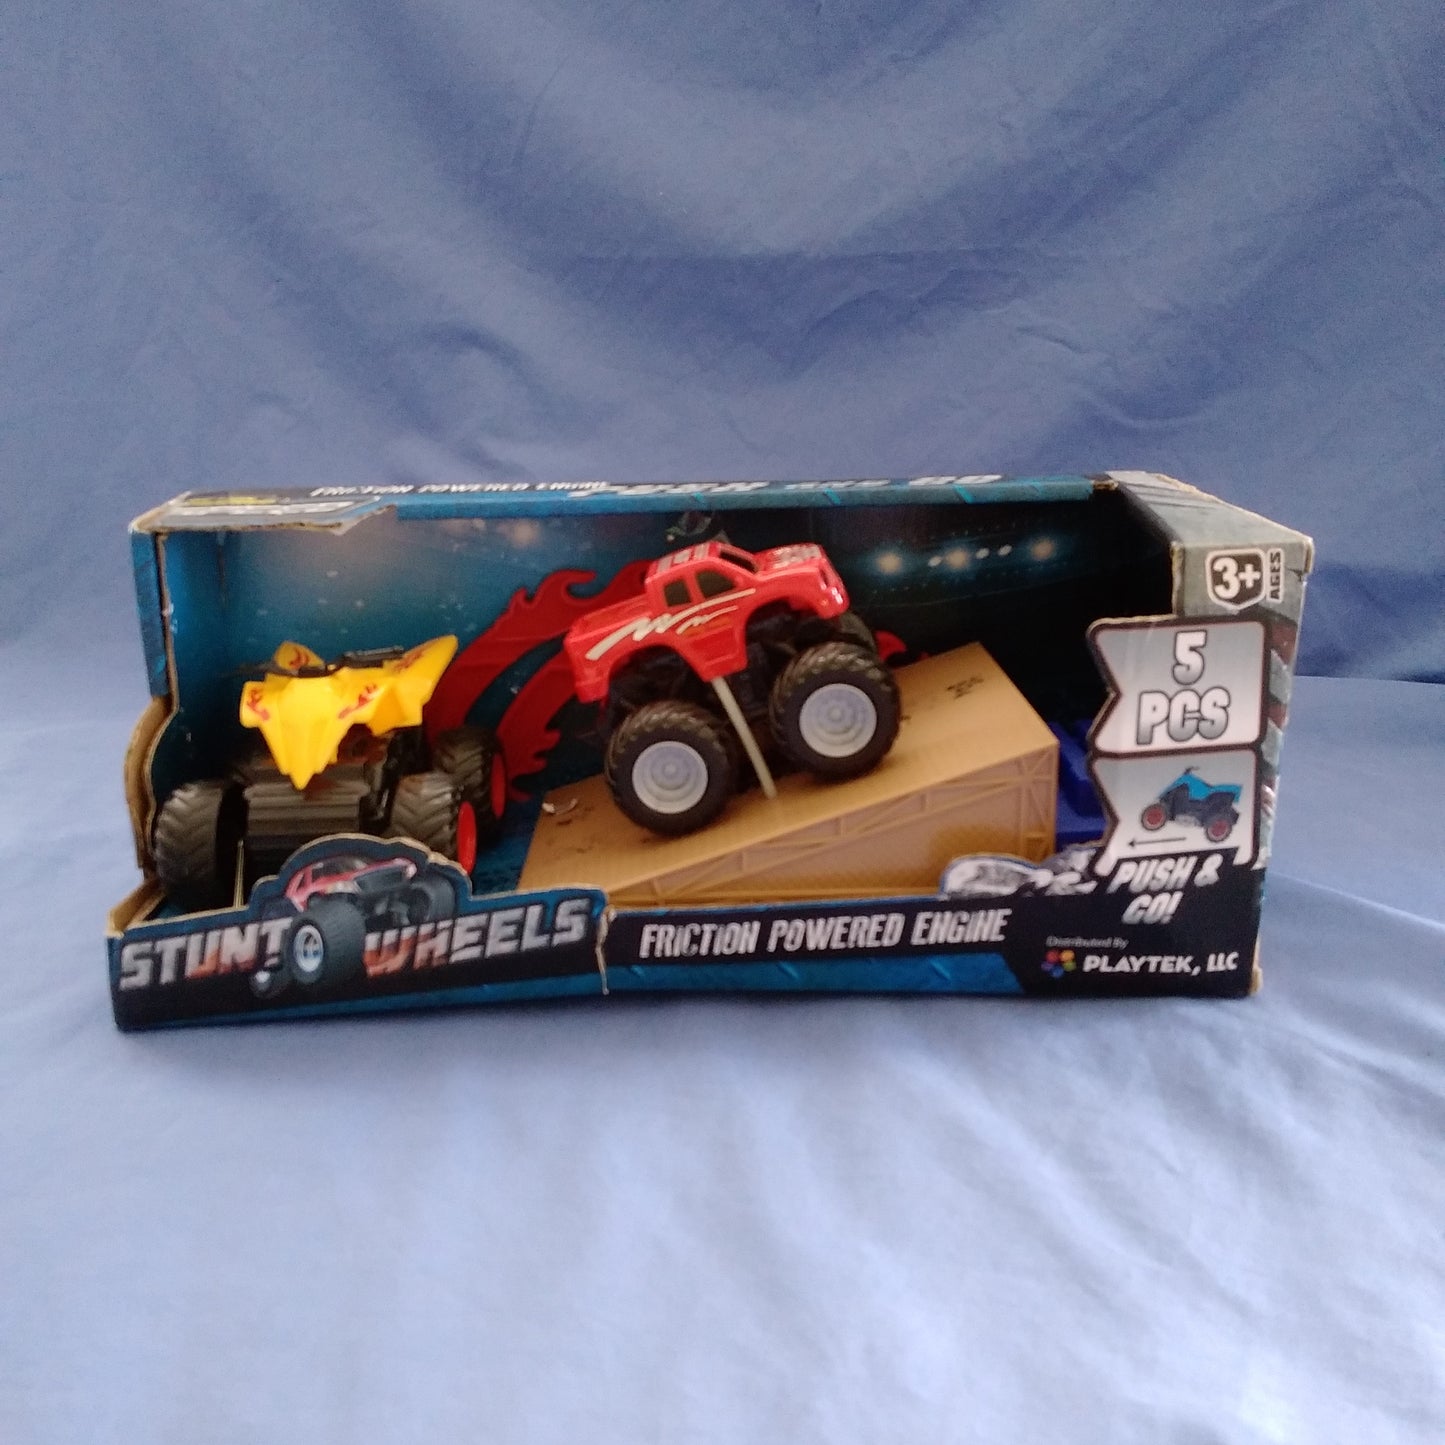 Stunt Wheels Friction Powered Engine Monster Truck and ATV - 5-pcs